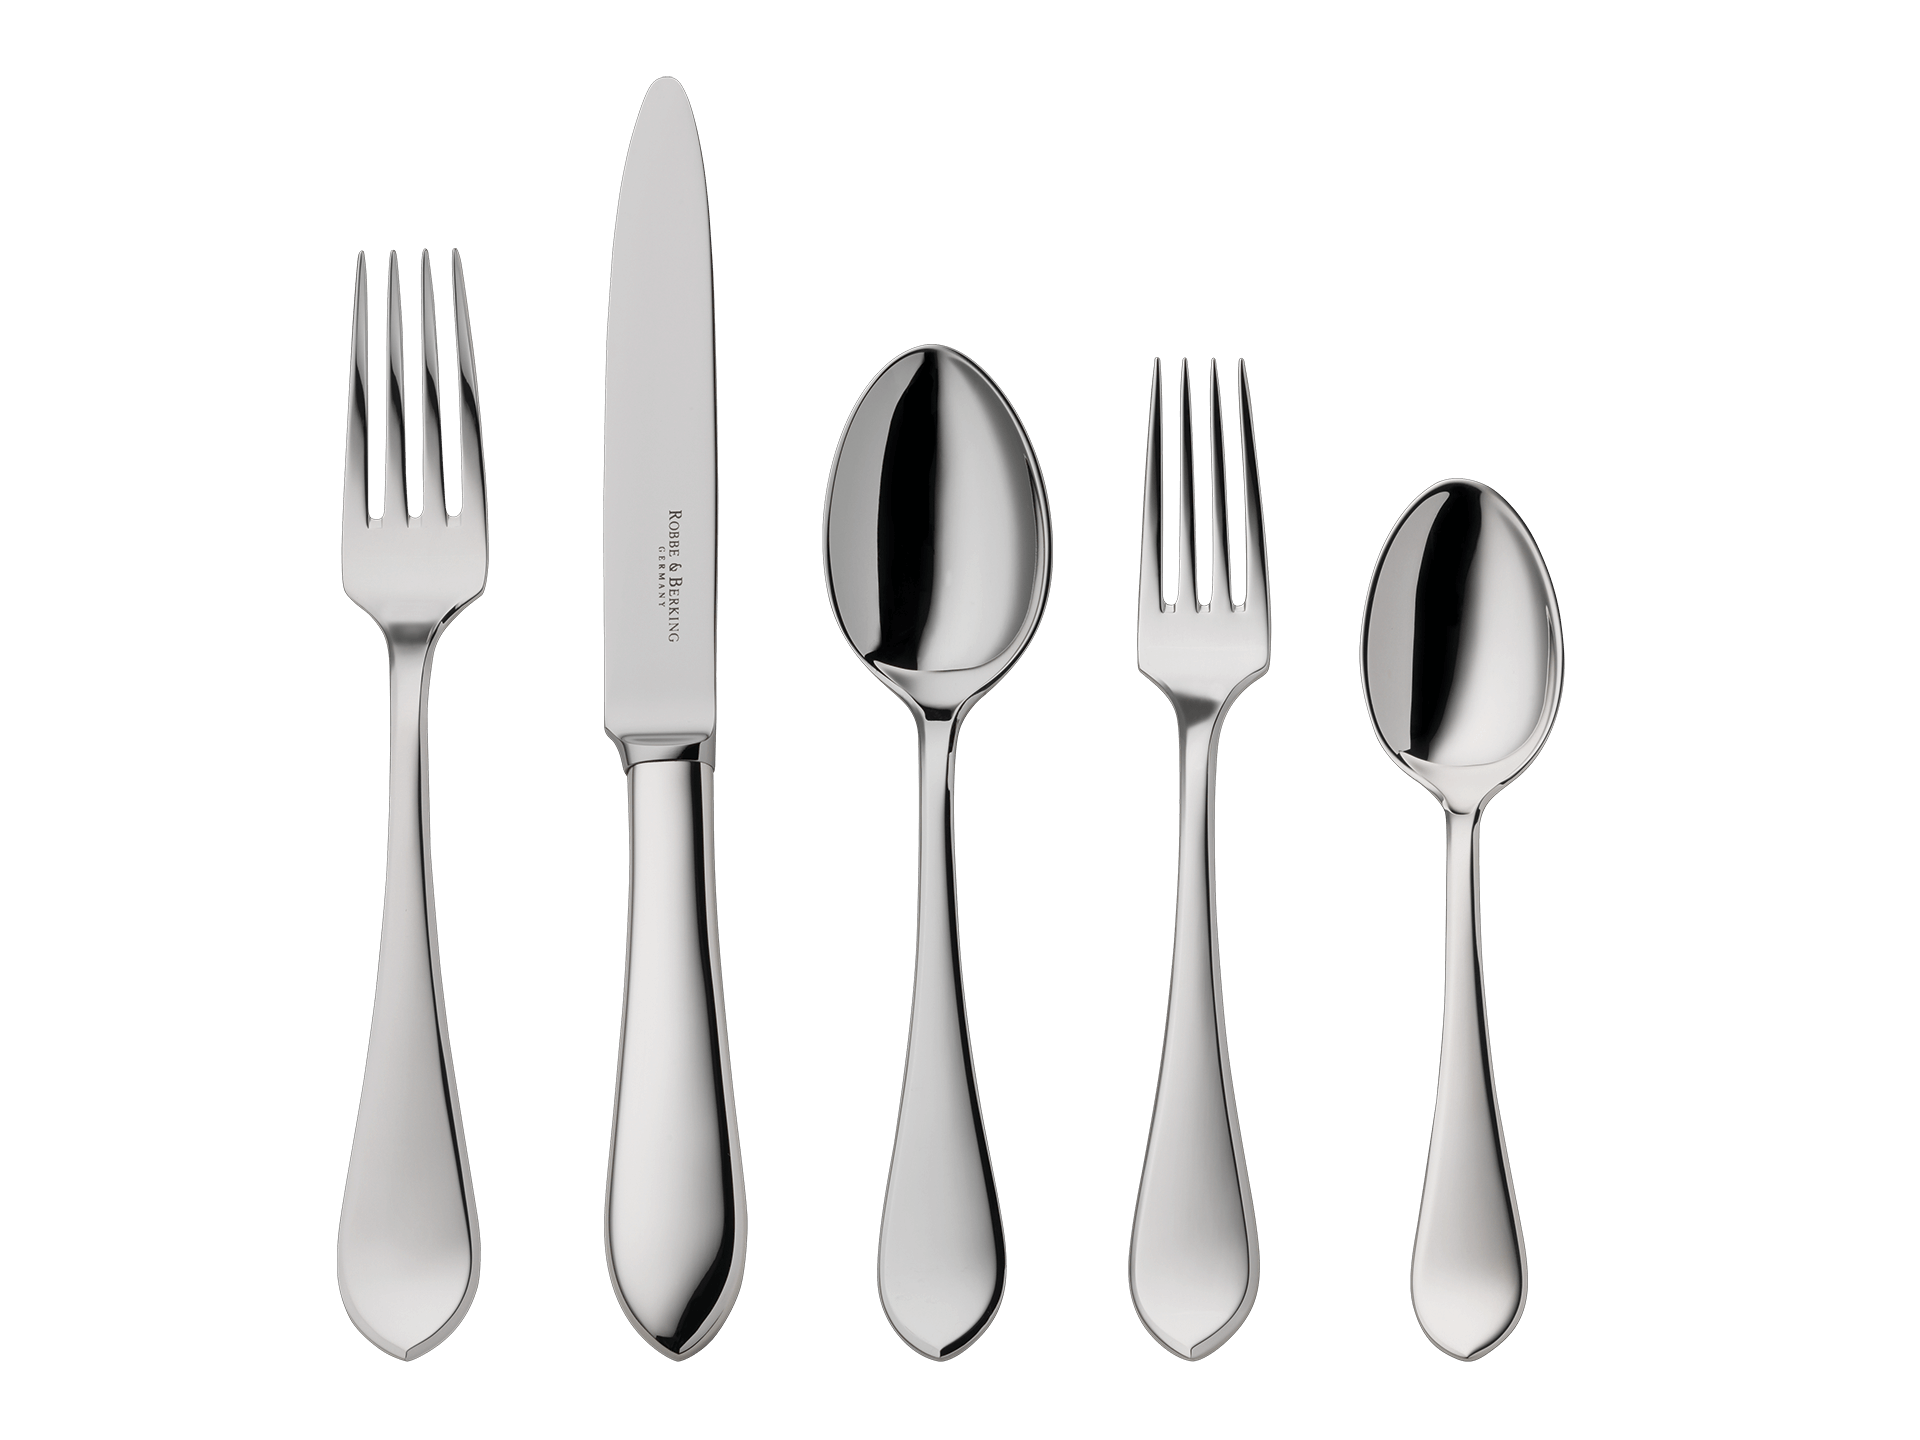 Eclipse 5-piece place setting (150g massive silverplated)